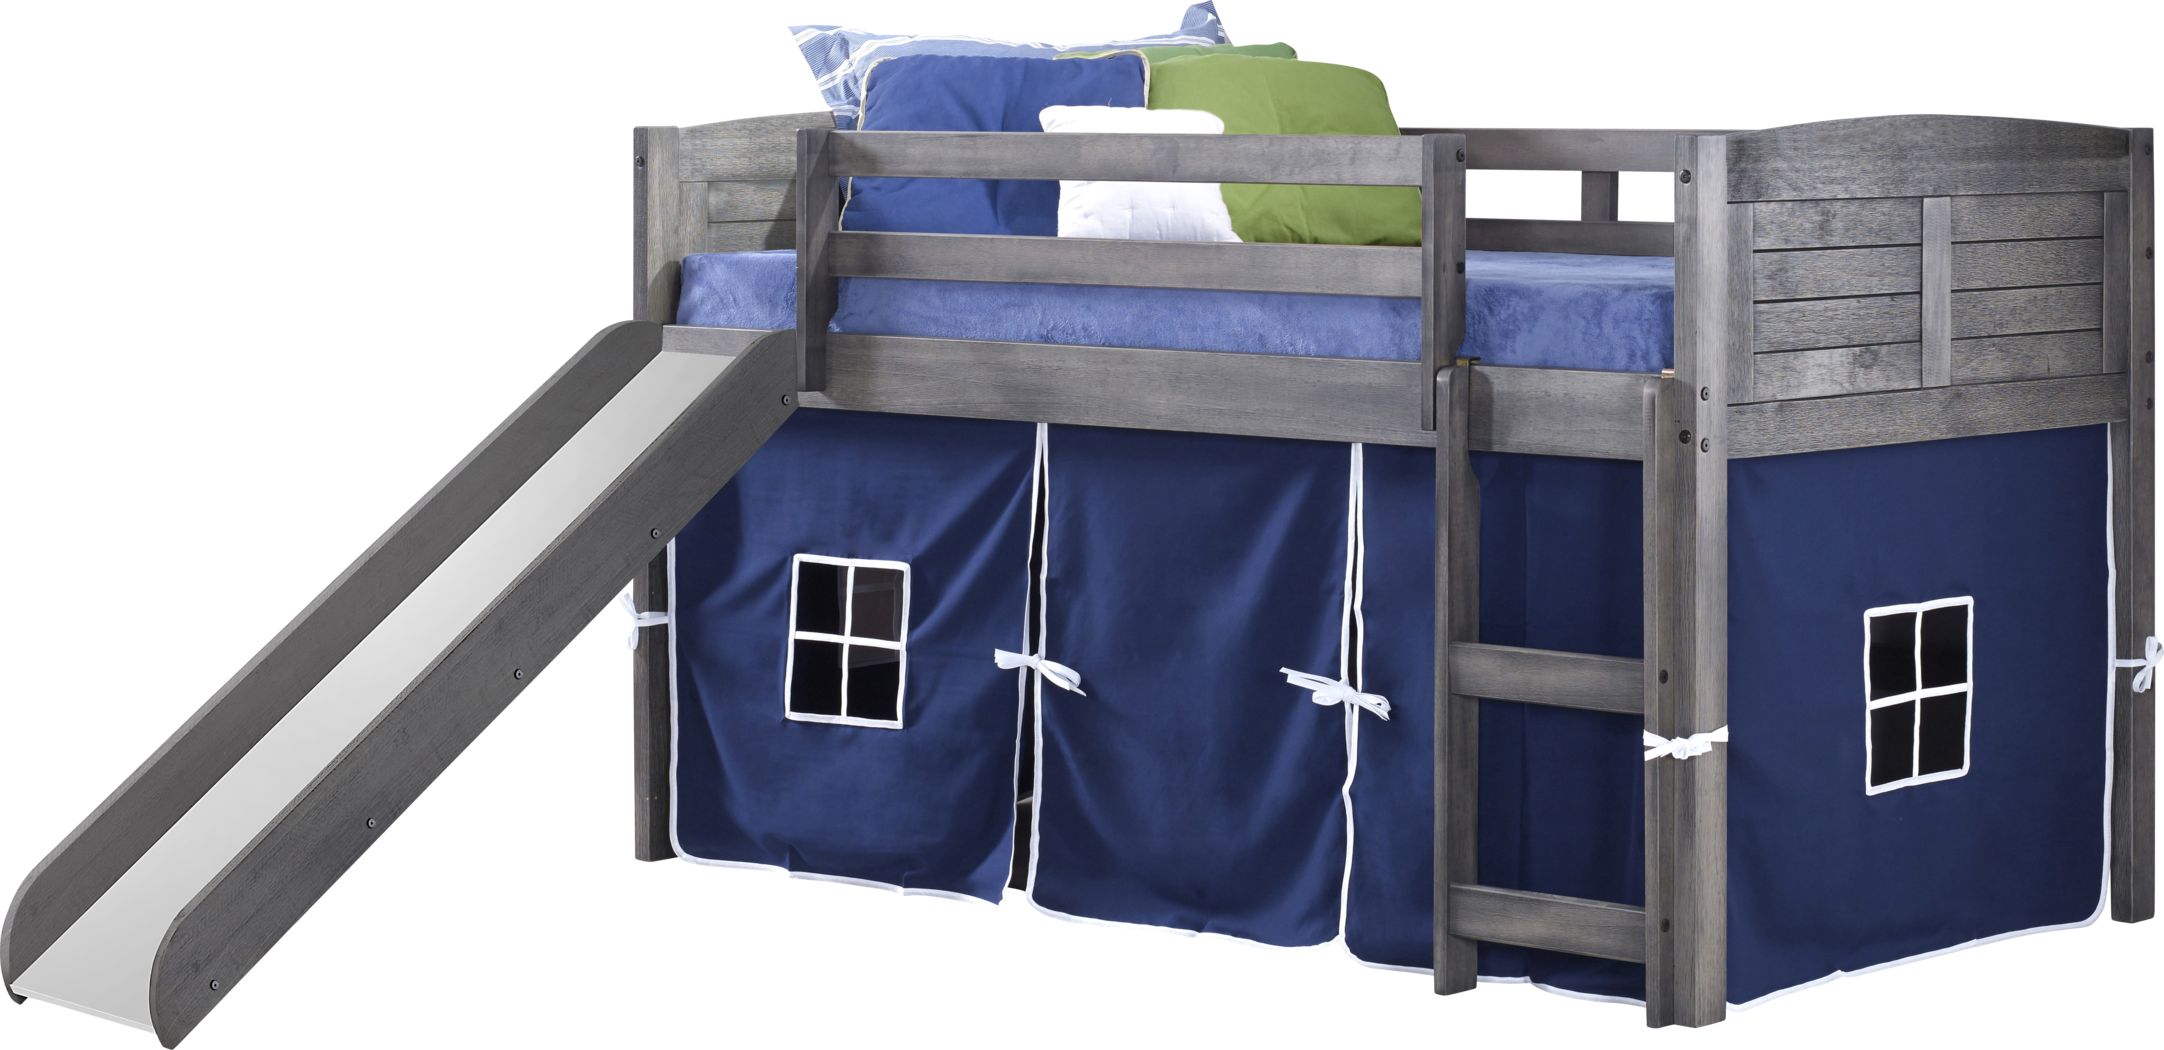 Loft Beds With Slide Underneath, Bunk Bed With Slide And Tent